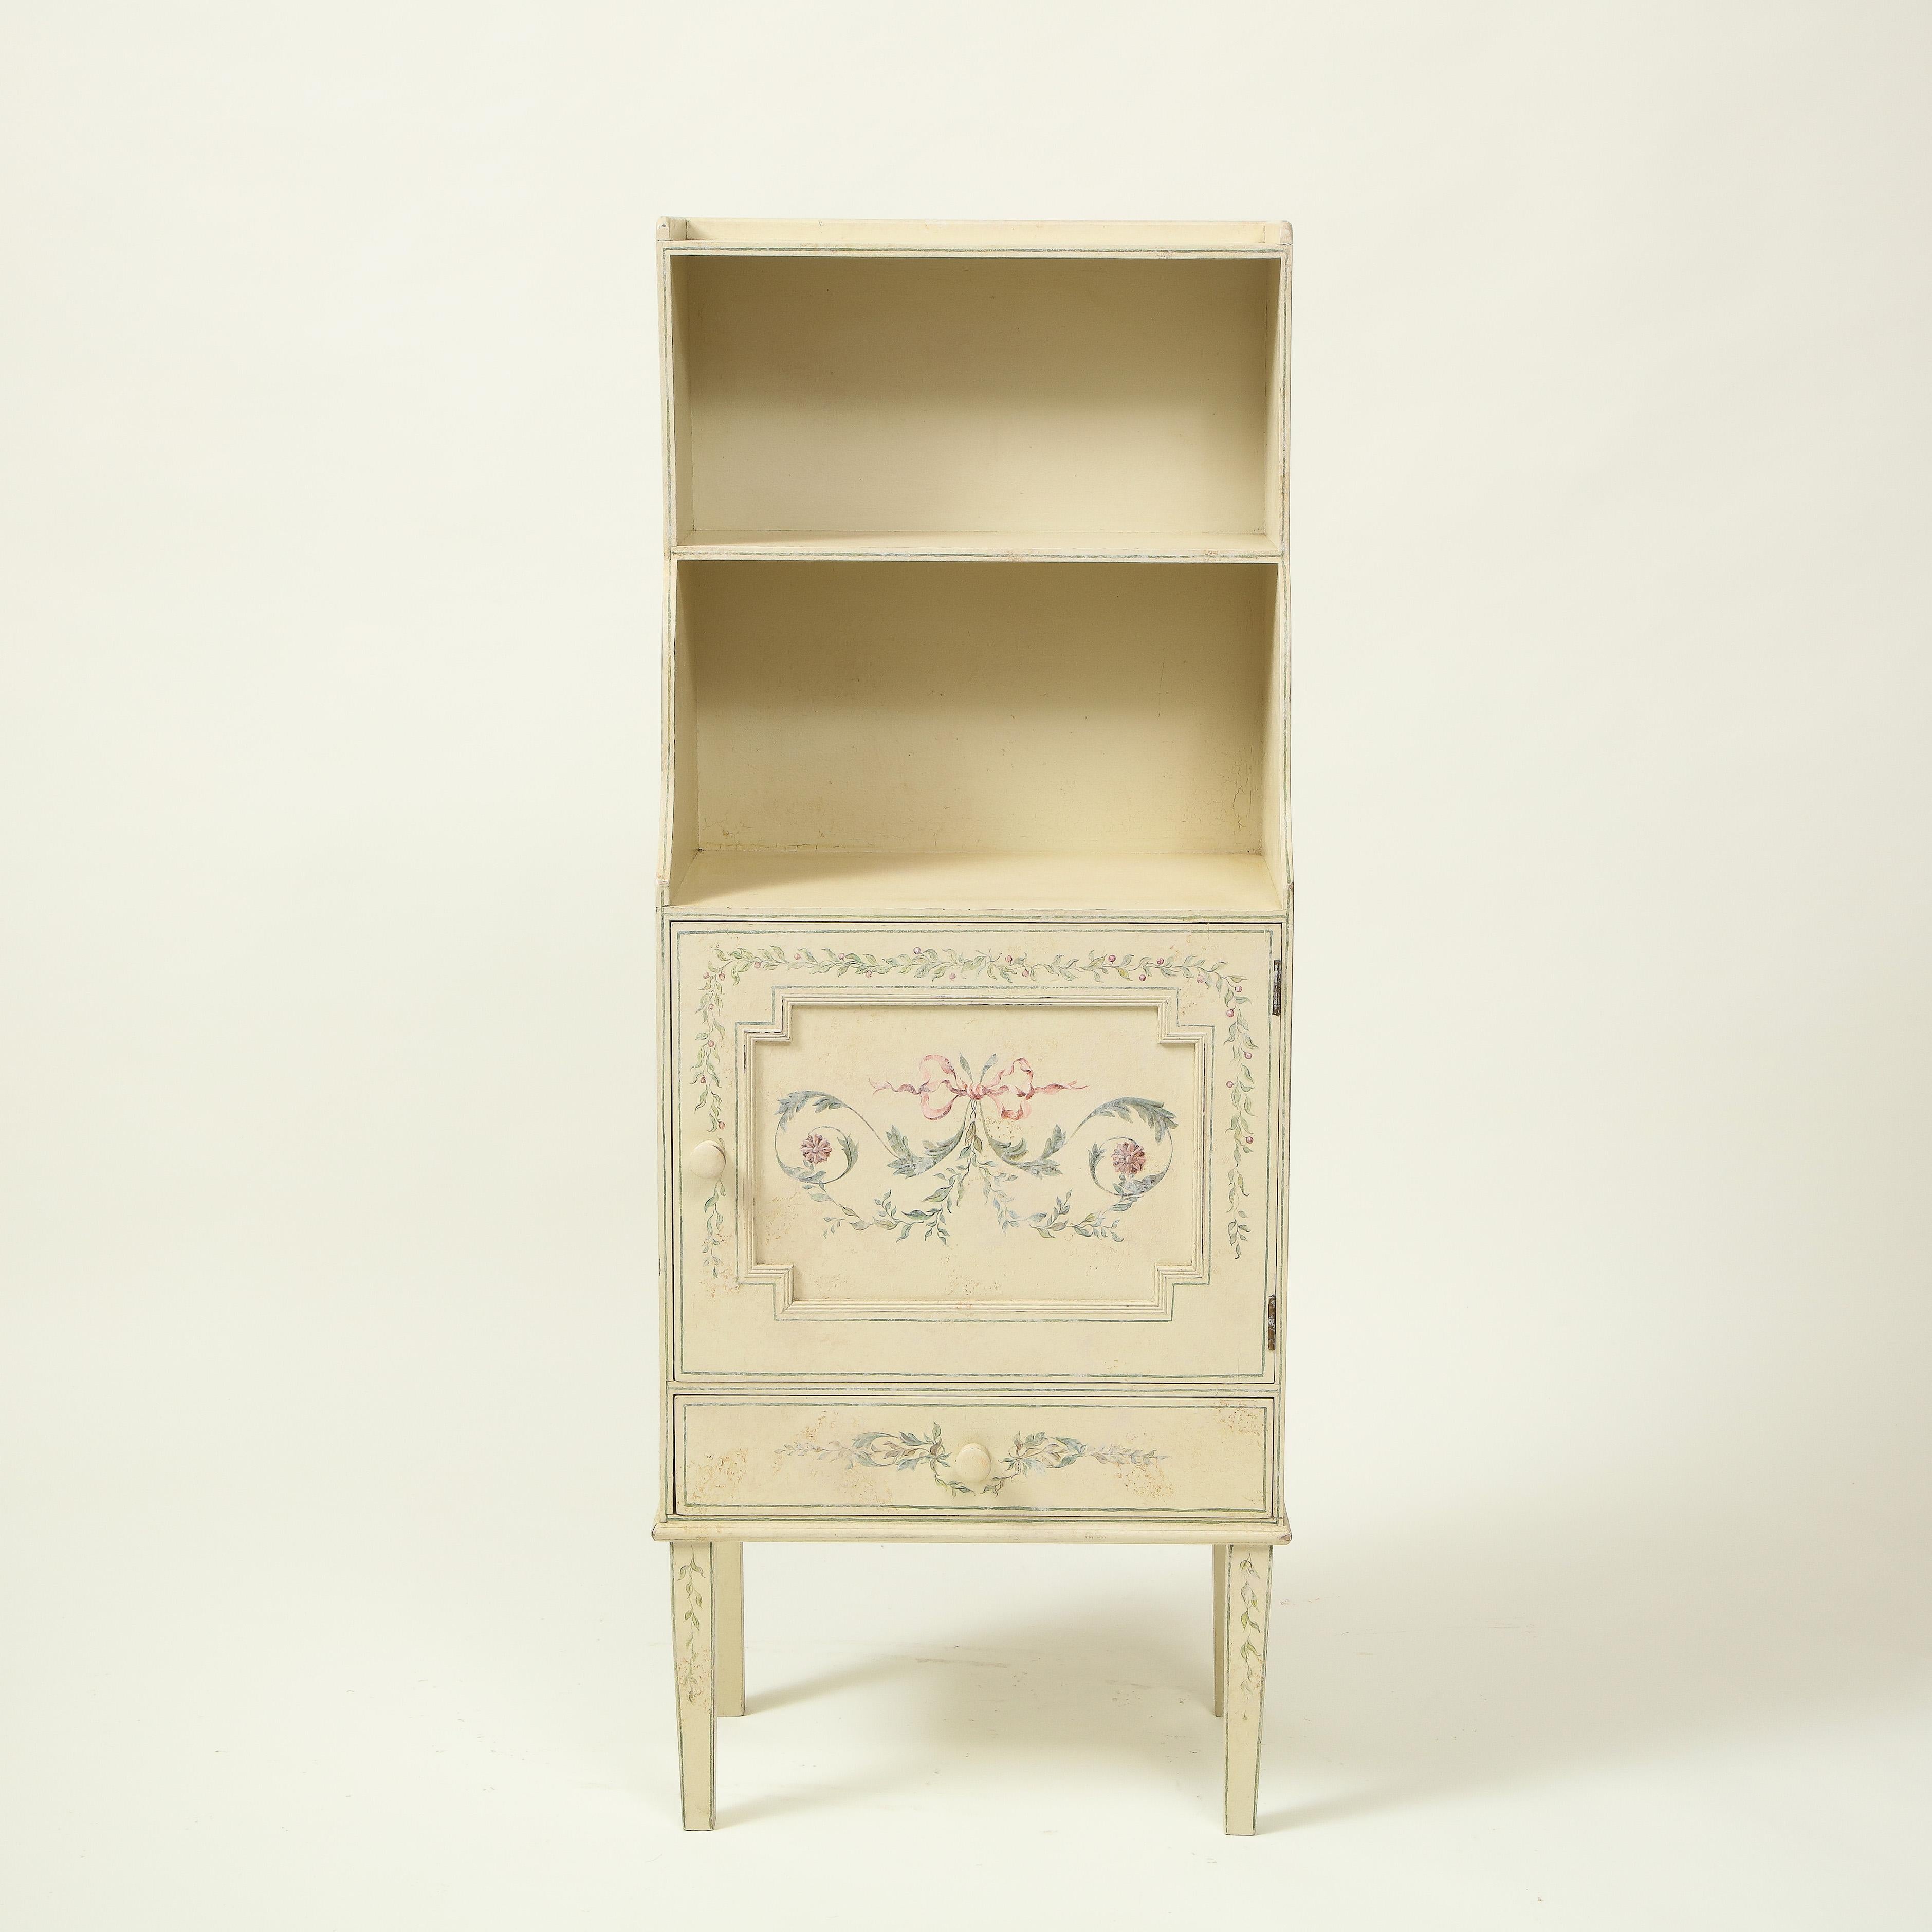 Fitted with two shelves over a paneled cupboard door and single drawer; raised on square tapering legs; decorated overall with polychrome arabesque decoration.

Provenance: From the Collection of Mario Buatta, New York, NY

Note: Sister Parish